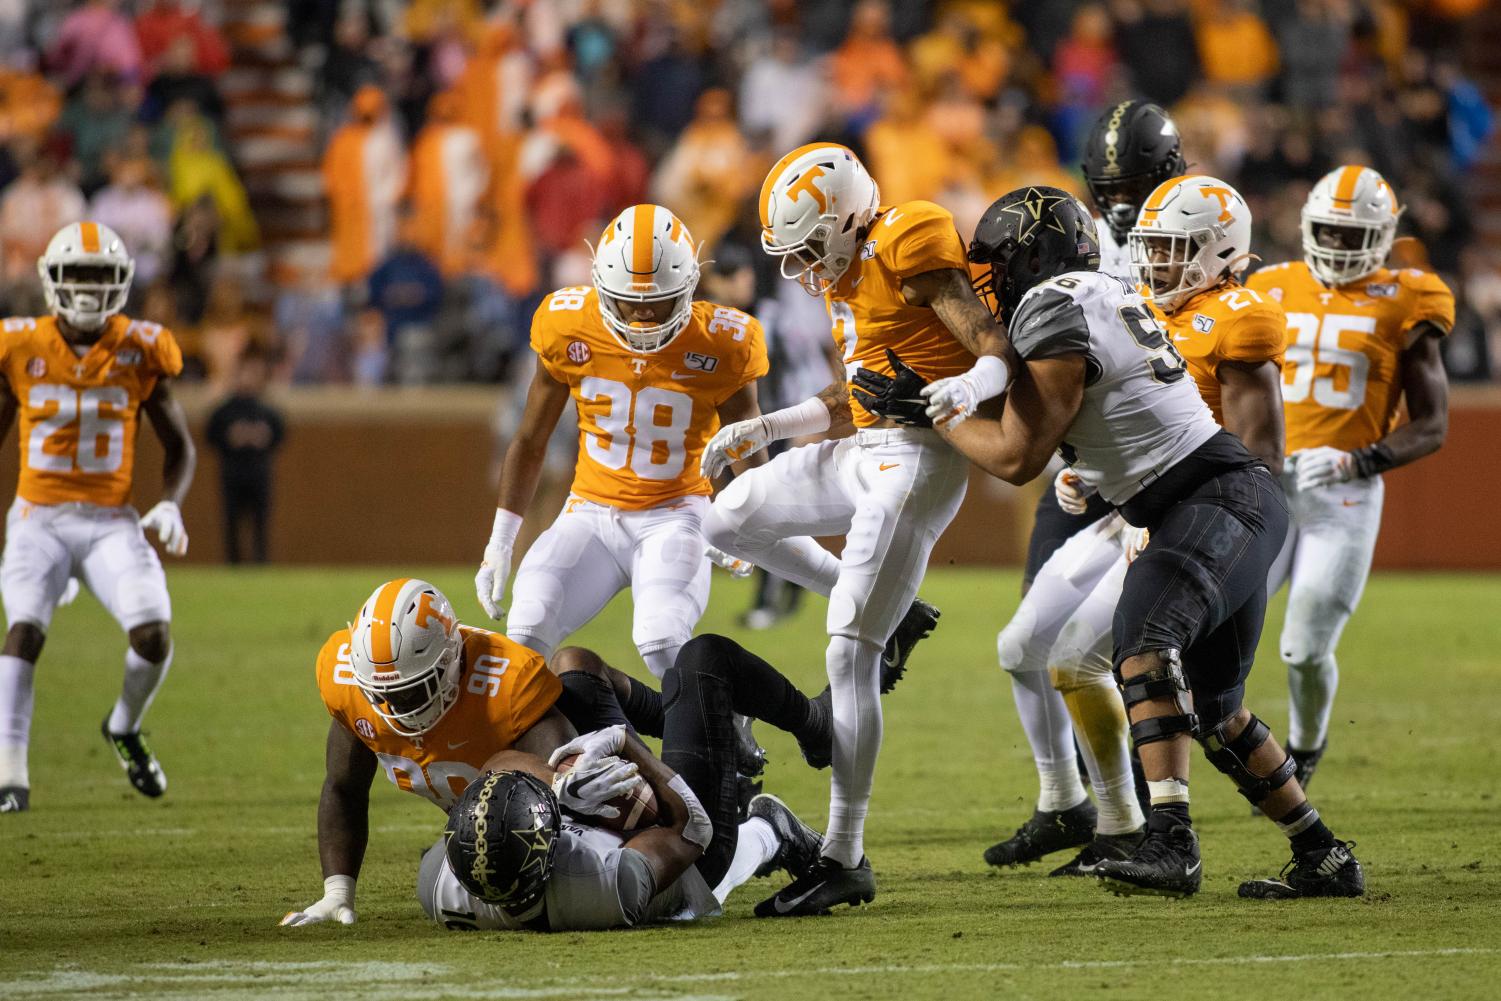 Kalija Lipscomb is brought down after a short gain in Vanderbilts 28-10 loss to Tennessee on Saturday.